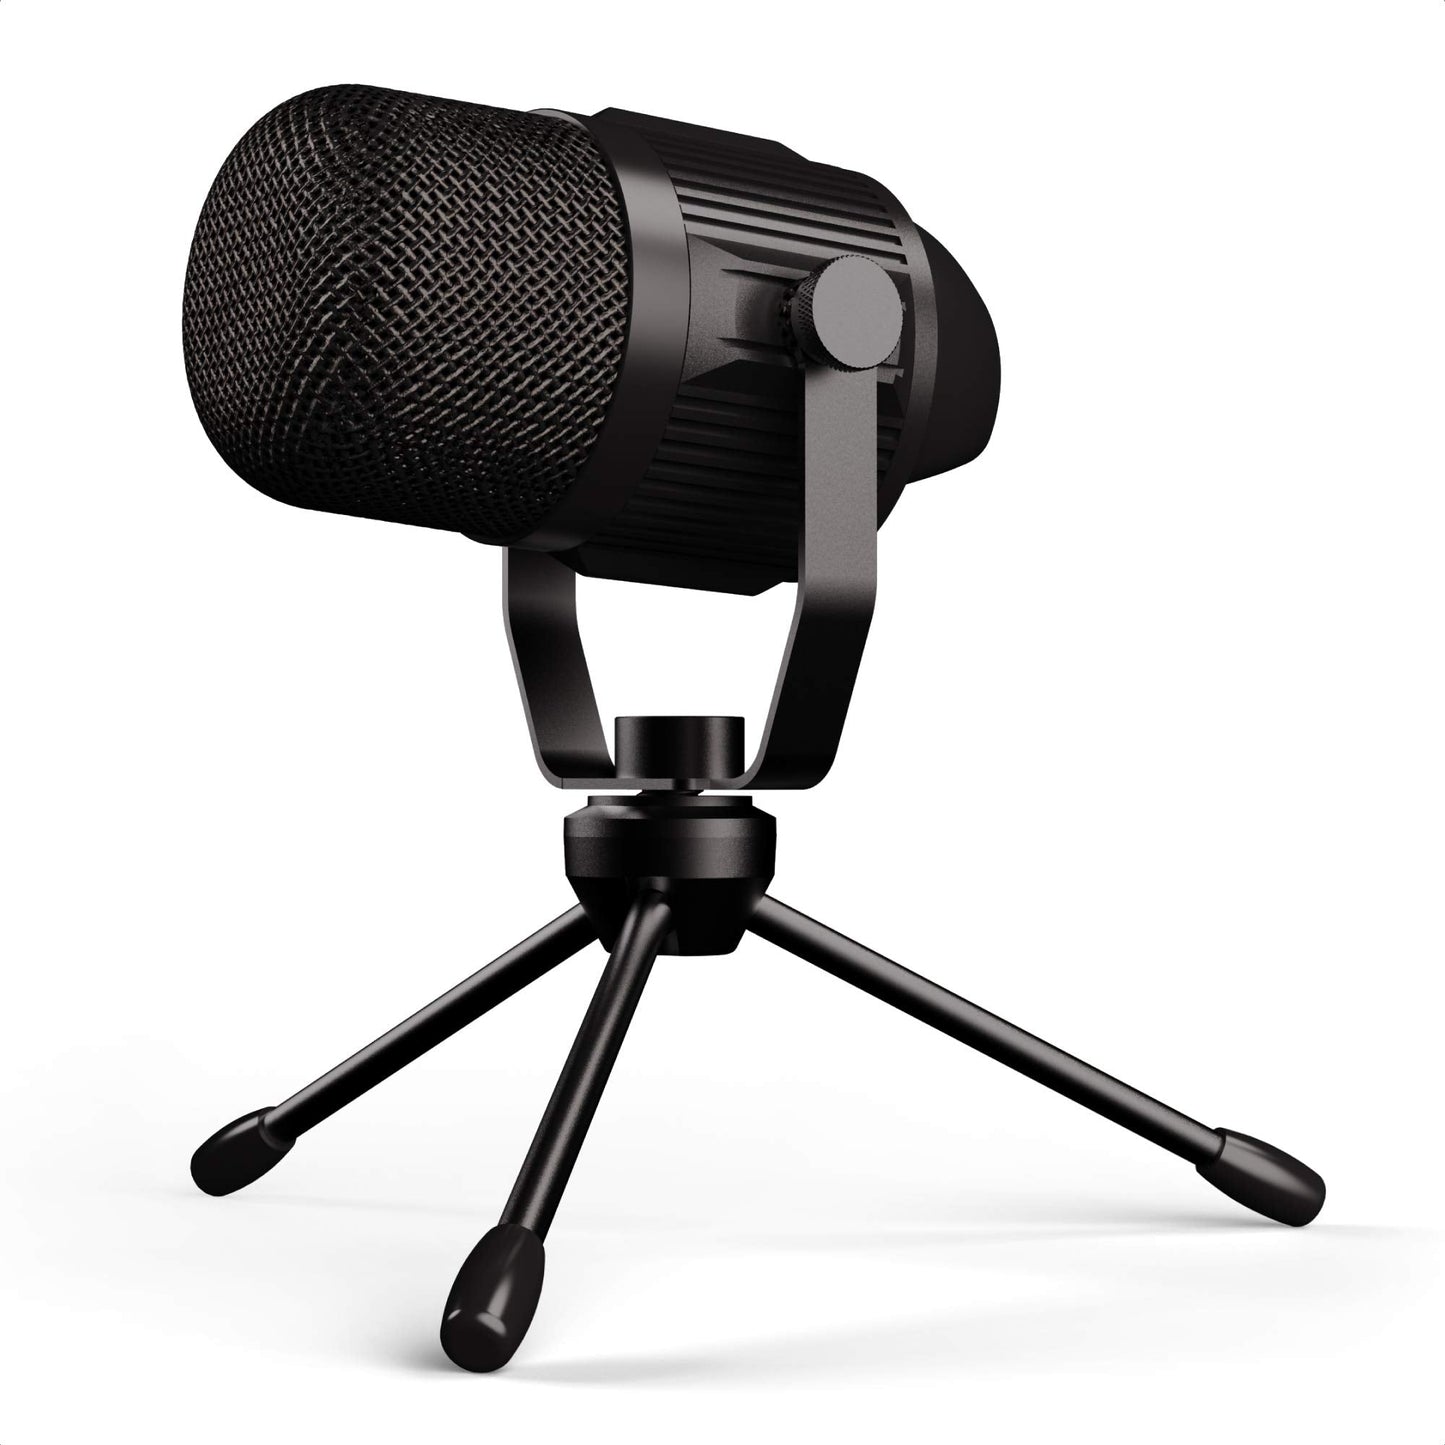 Refurbished Majority RS1 Gaming Microphone Condenser Microphone including Stand